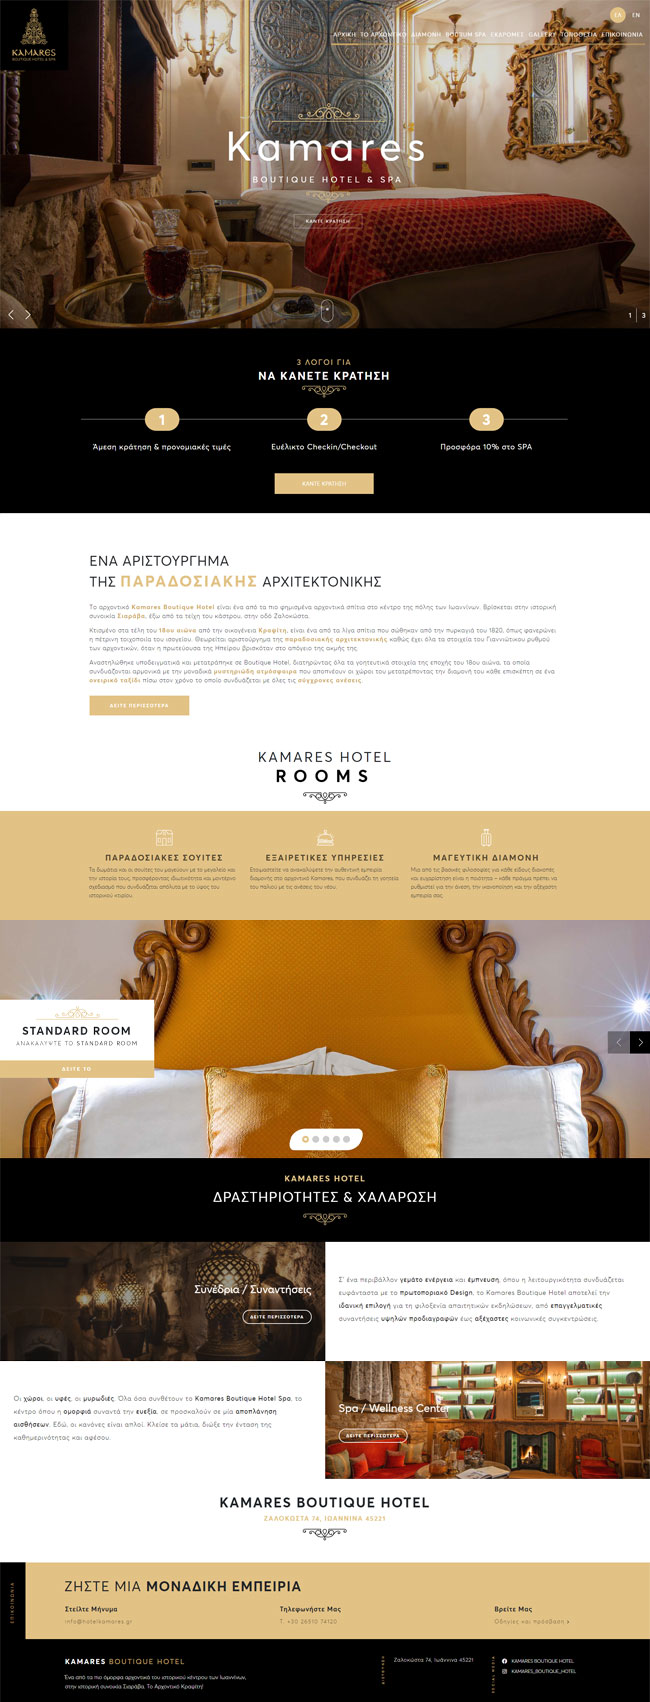 Responsive website for Kamares Boutique Hotel & Spa in Ioannina